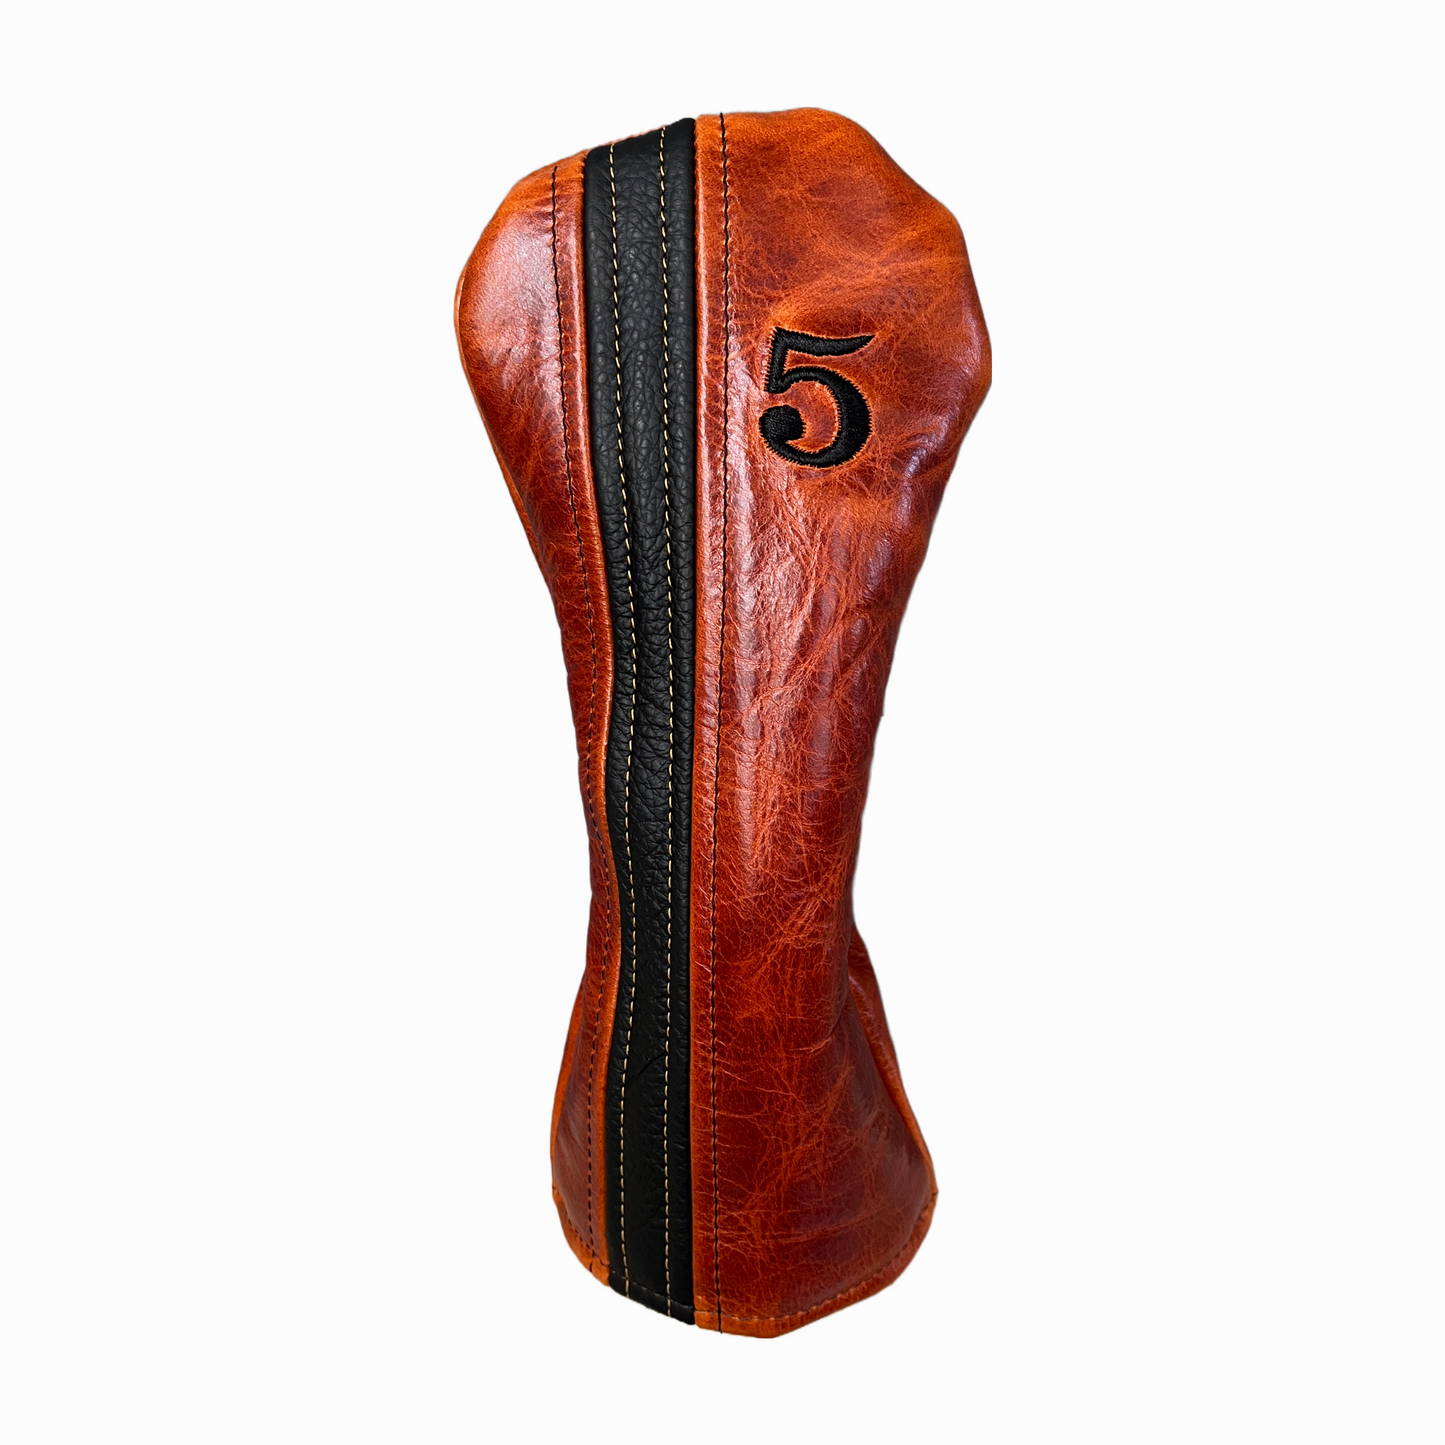 Rustic Chestnut with Black Leather